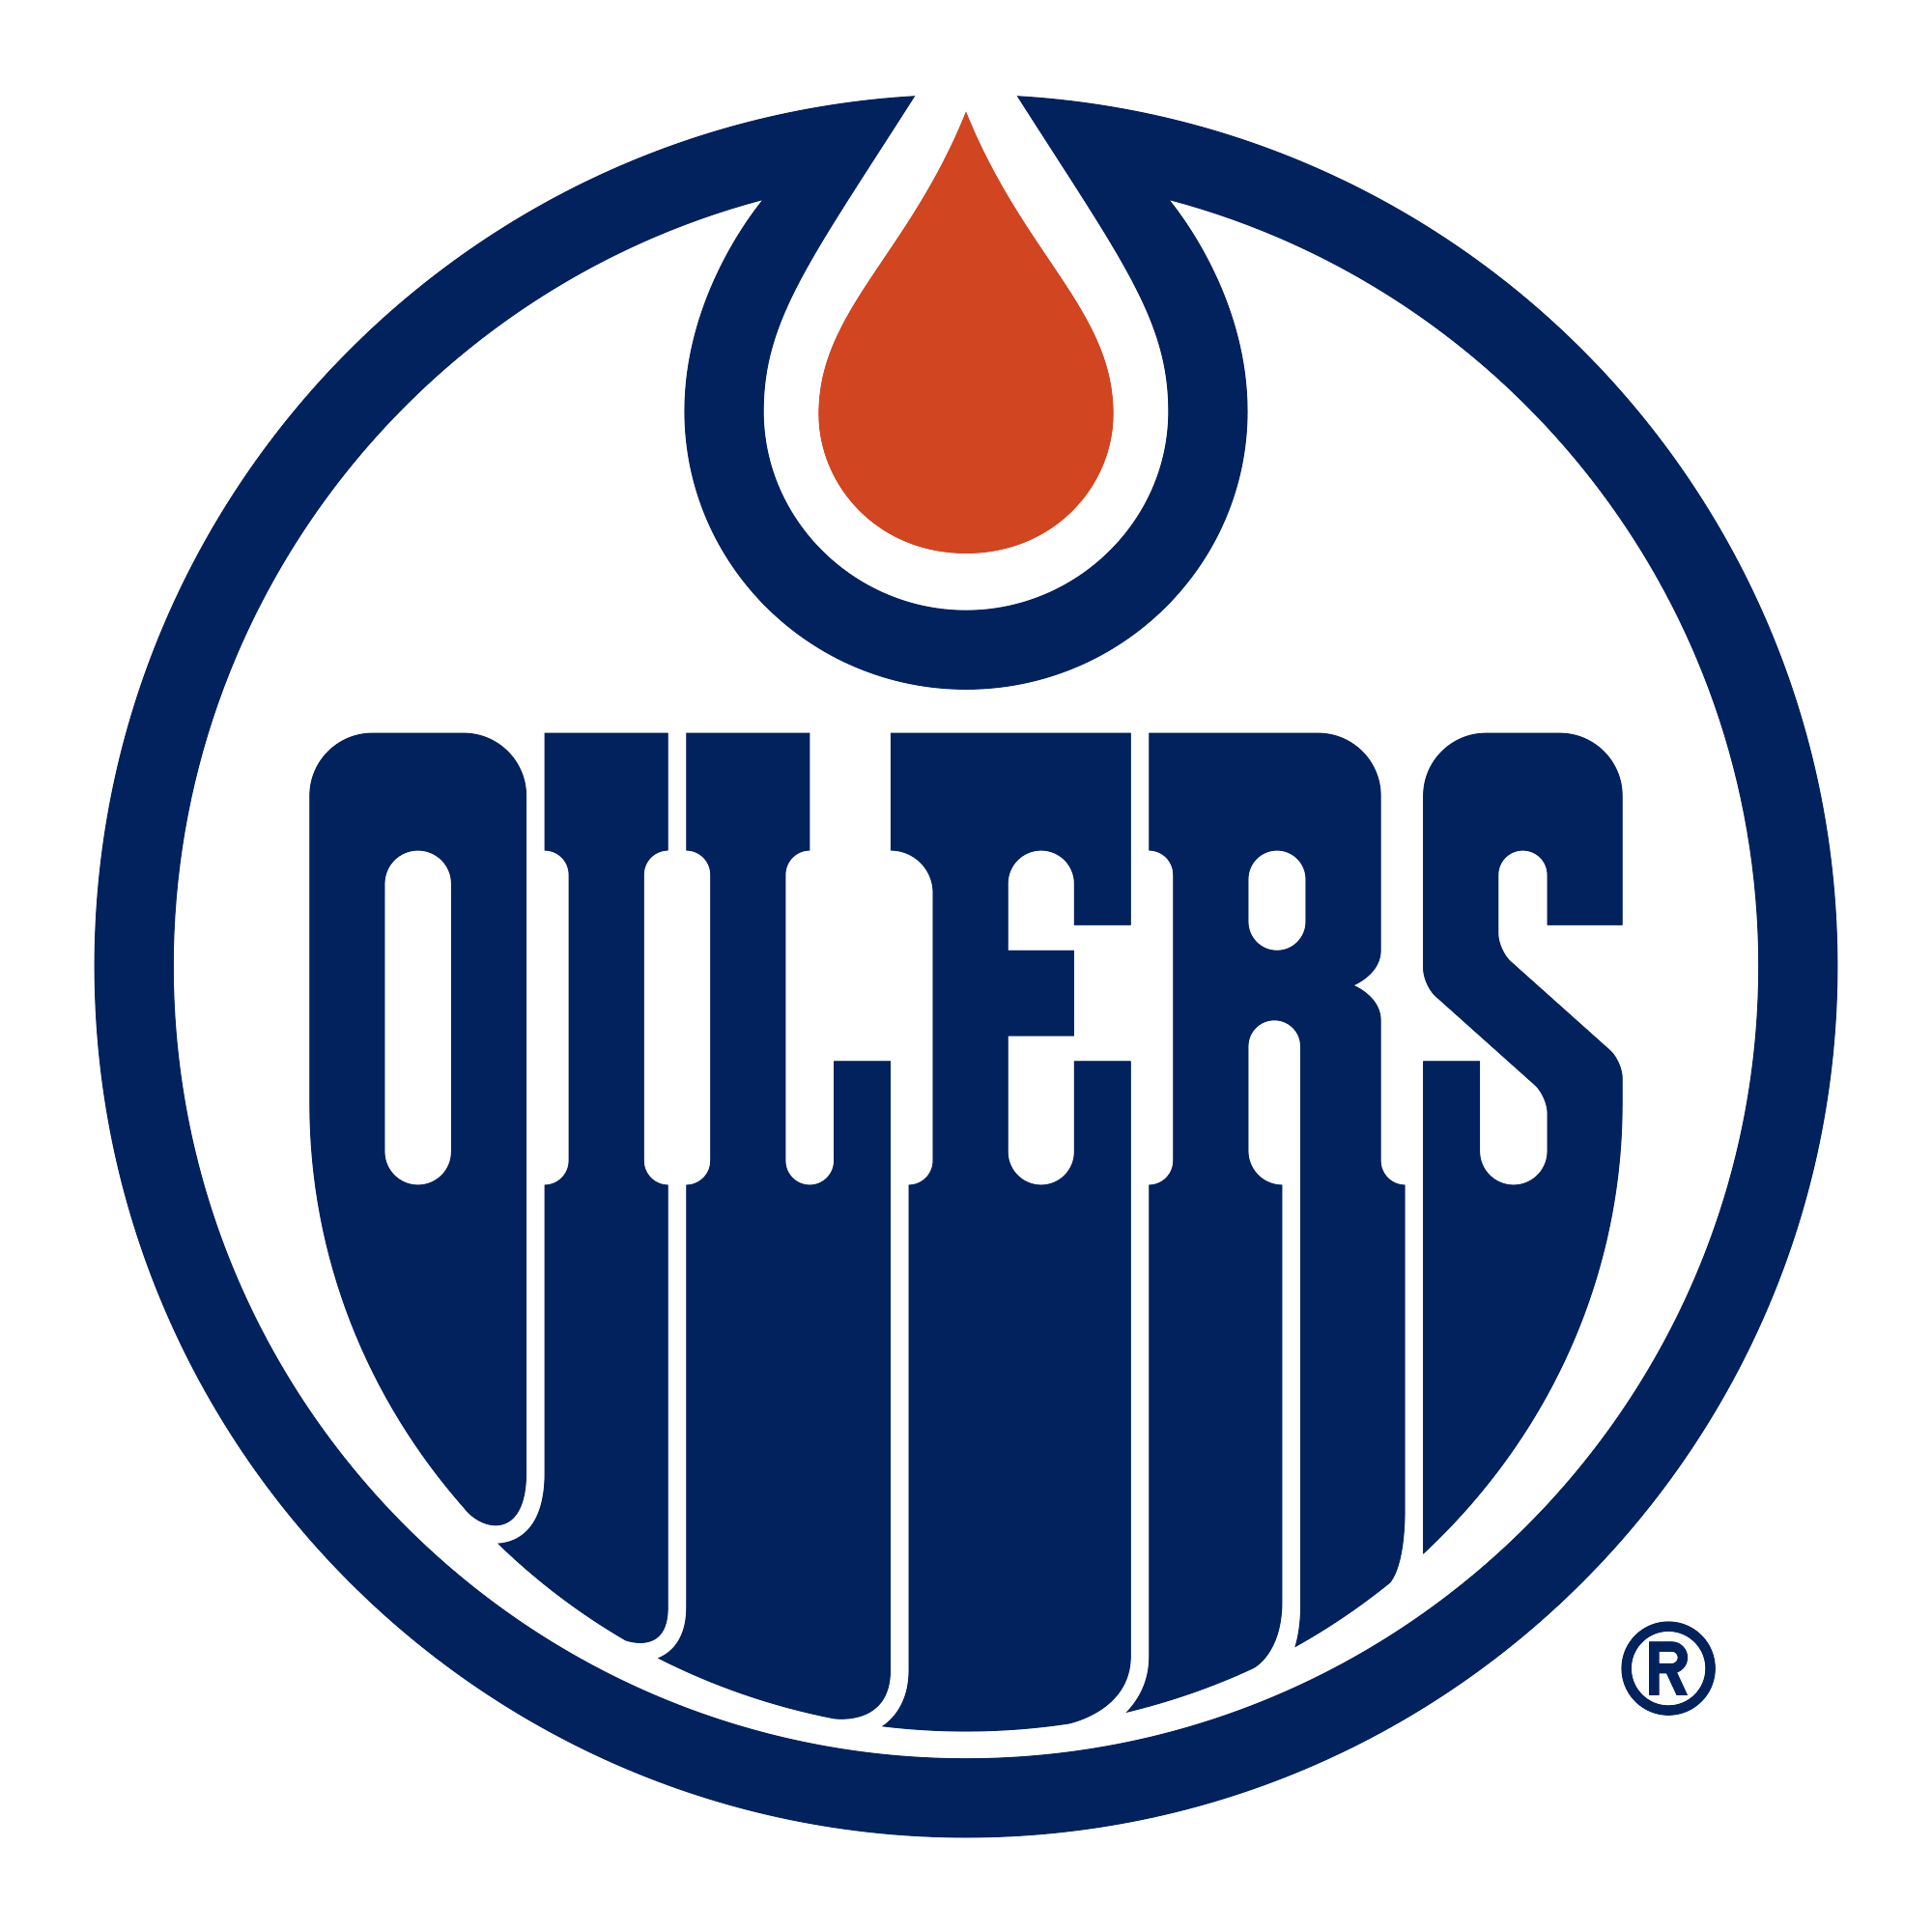 Oilers Entertainment Group Inc.